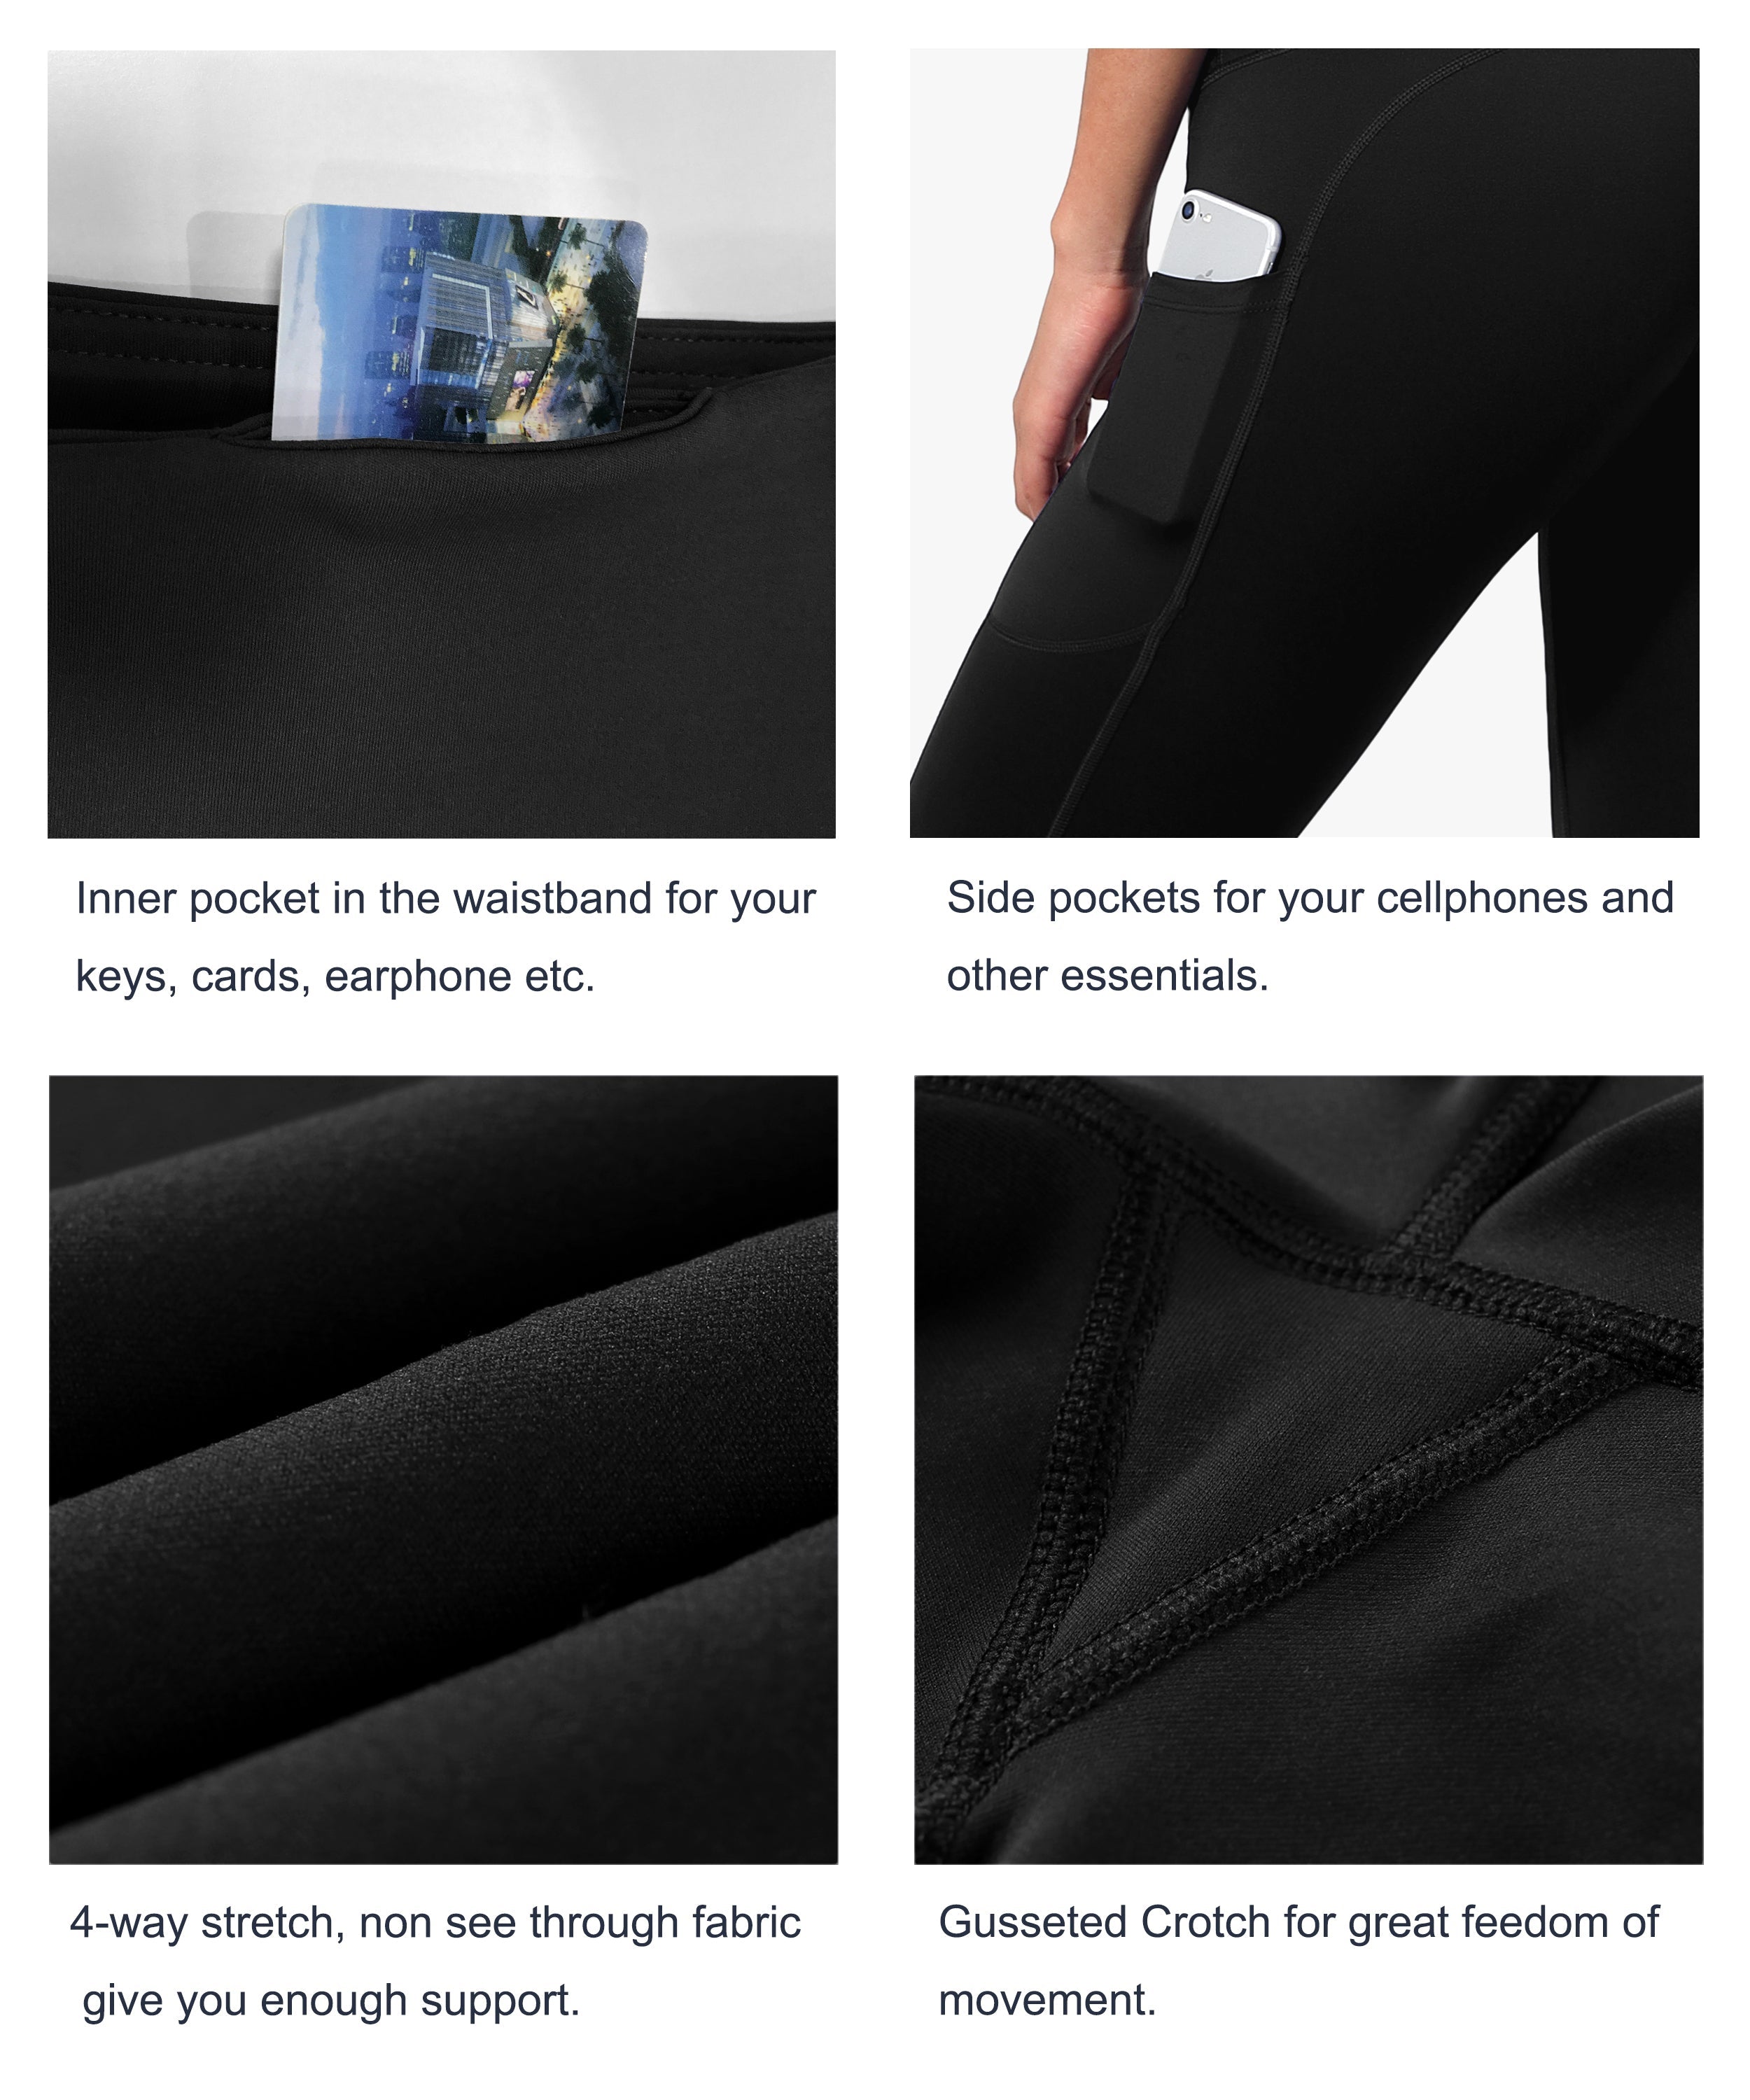 Hip Line Side Pockets Biking Pants black Sexy Hip Line Side Pockets 75%Nylon/25%Spandex Fabric doesn't attract lint easily 4-way stretch No see-through Moisture-wicking Tummy control Inner pocket Two lengths